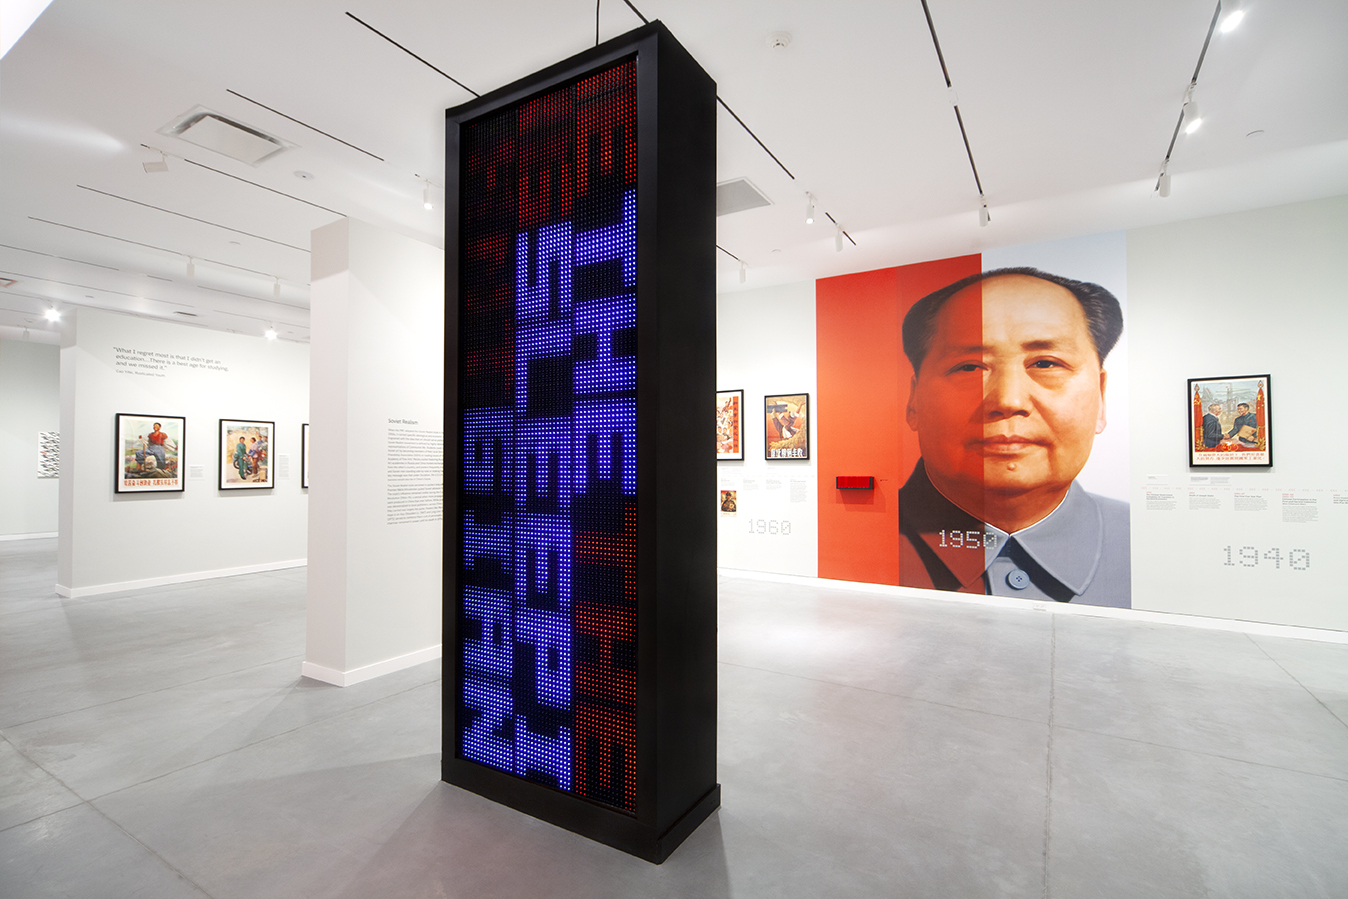 An imposing photo of Mao Zedong on a wall overlaid in red and a giant digitized screen of the exhibit facing him.